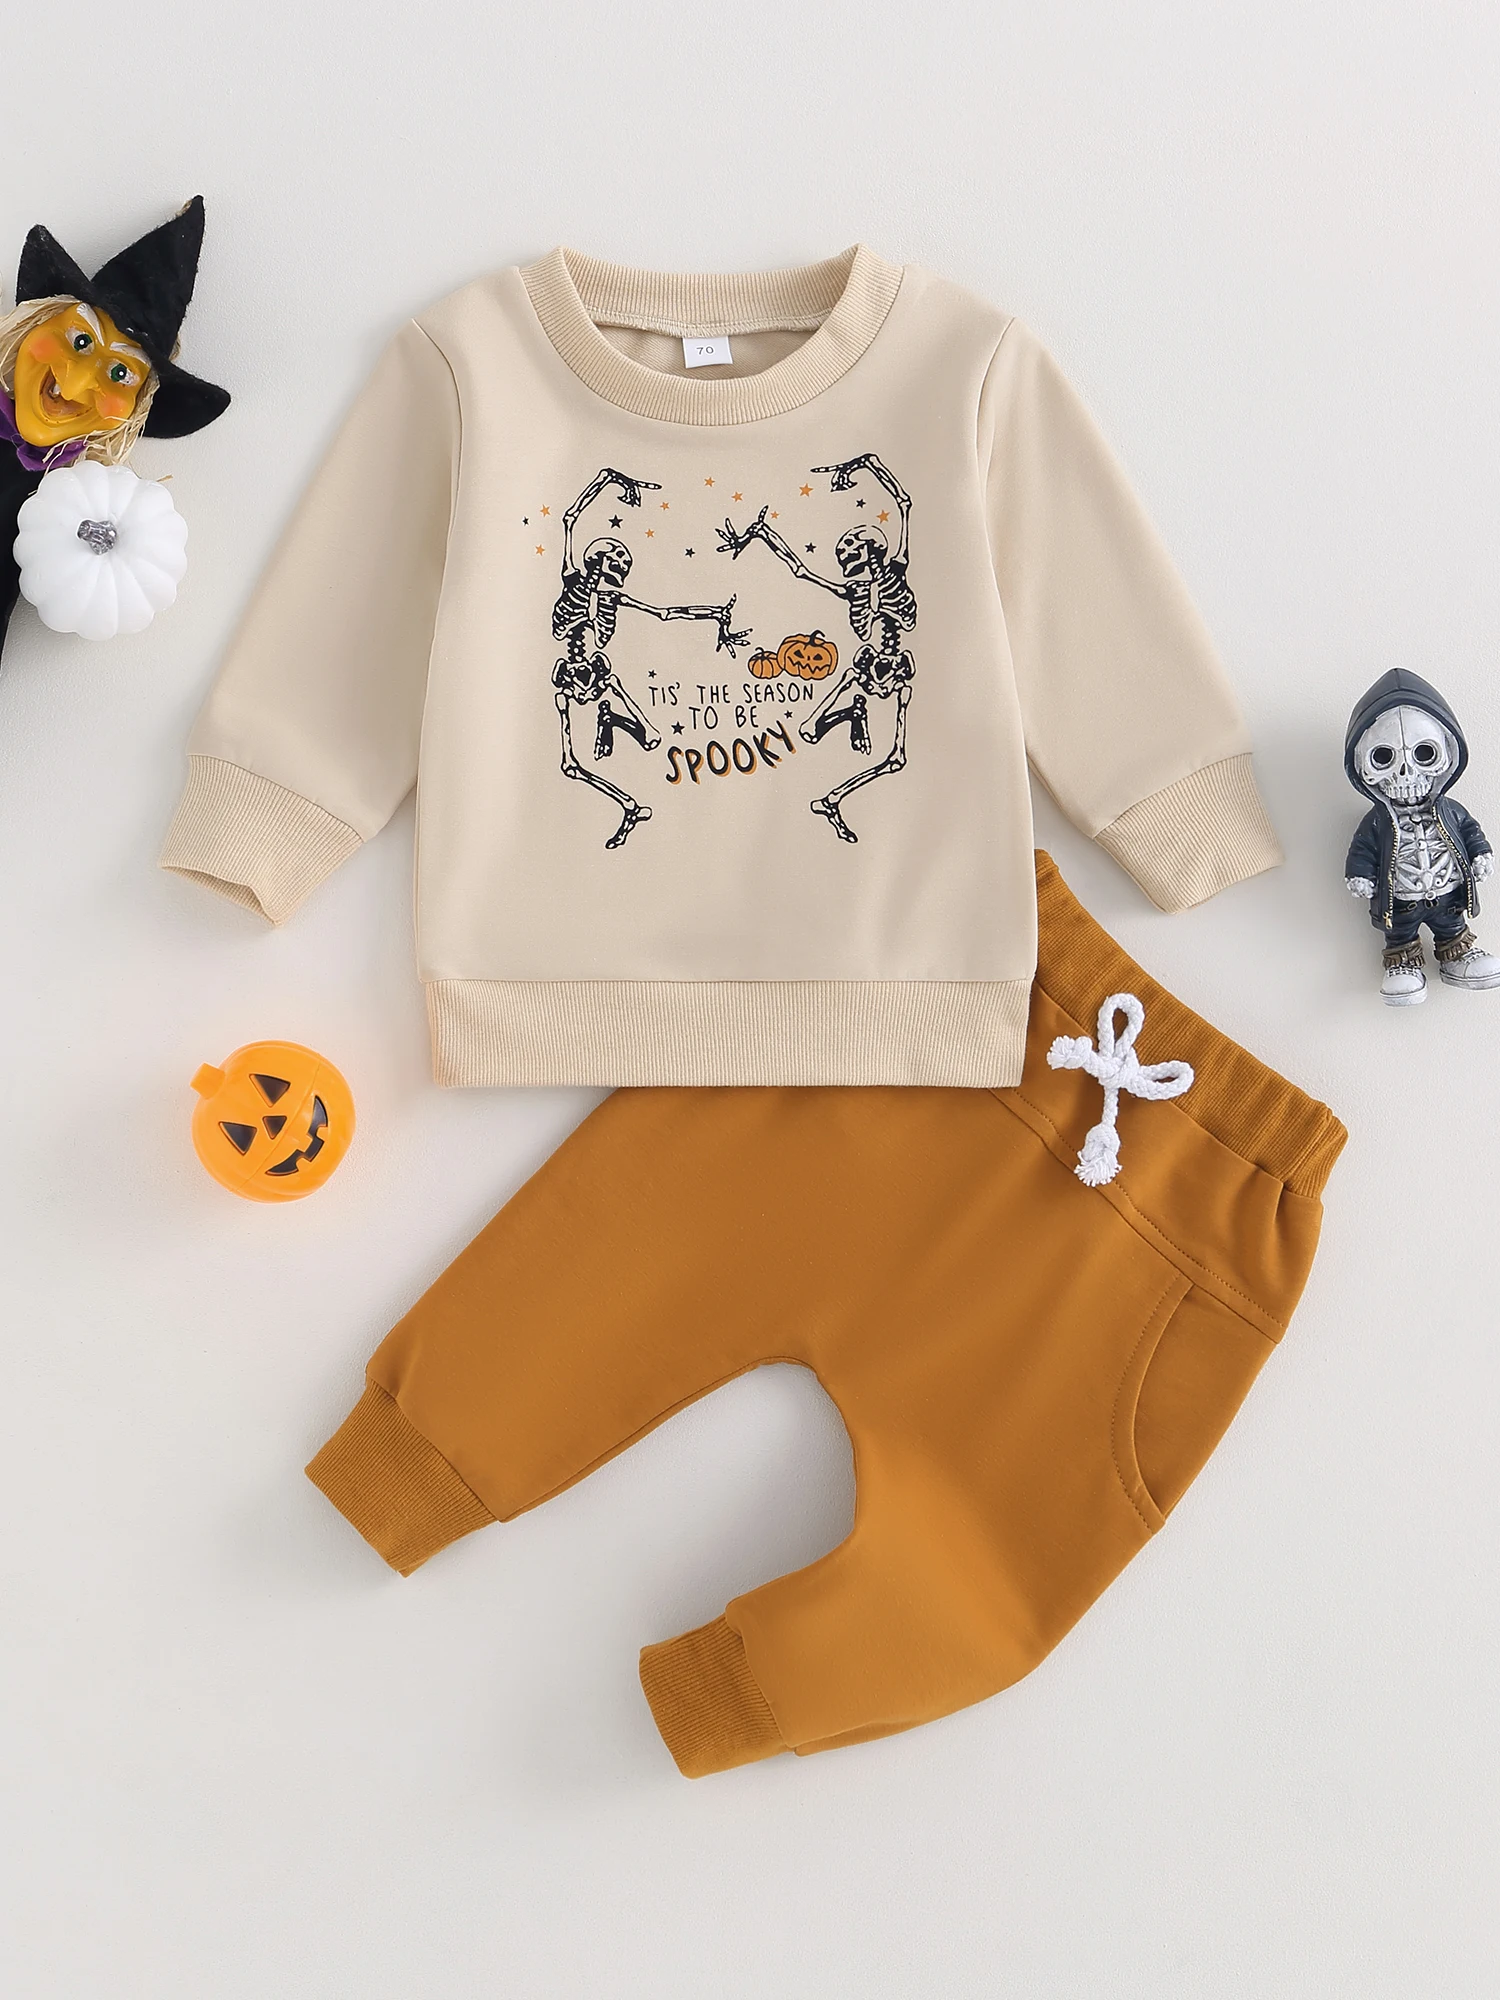 

Spooky and Stylish Skeleton Crewneck Sweatshirt and Jogger Pants Halloween Costume Set for Newborn Baby Boys Available in